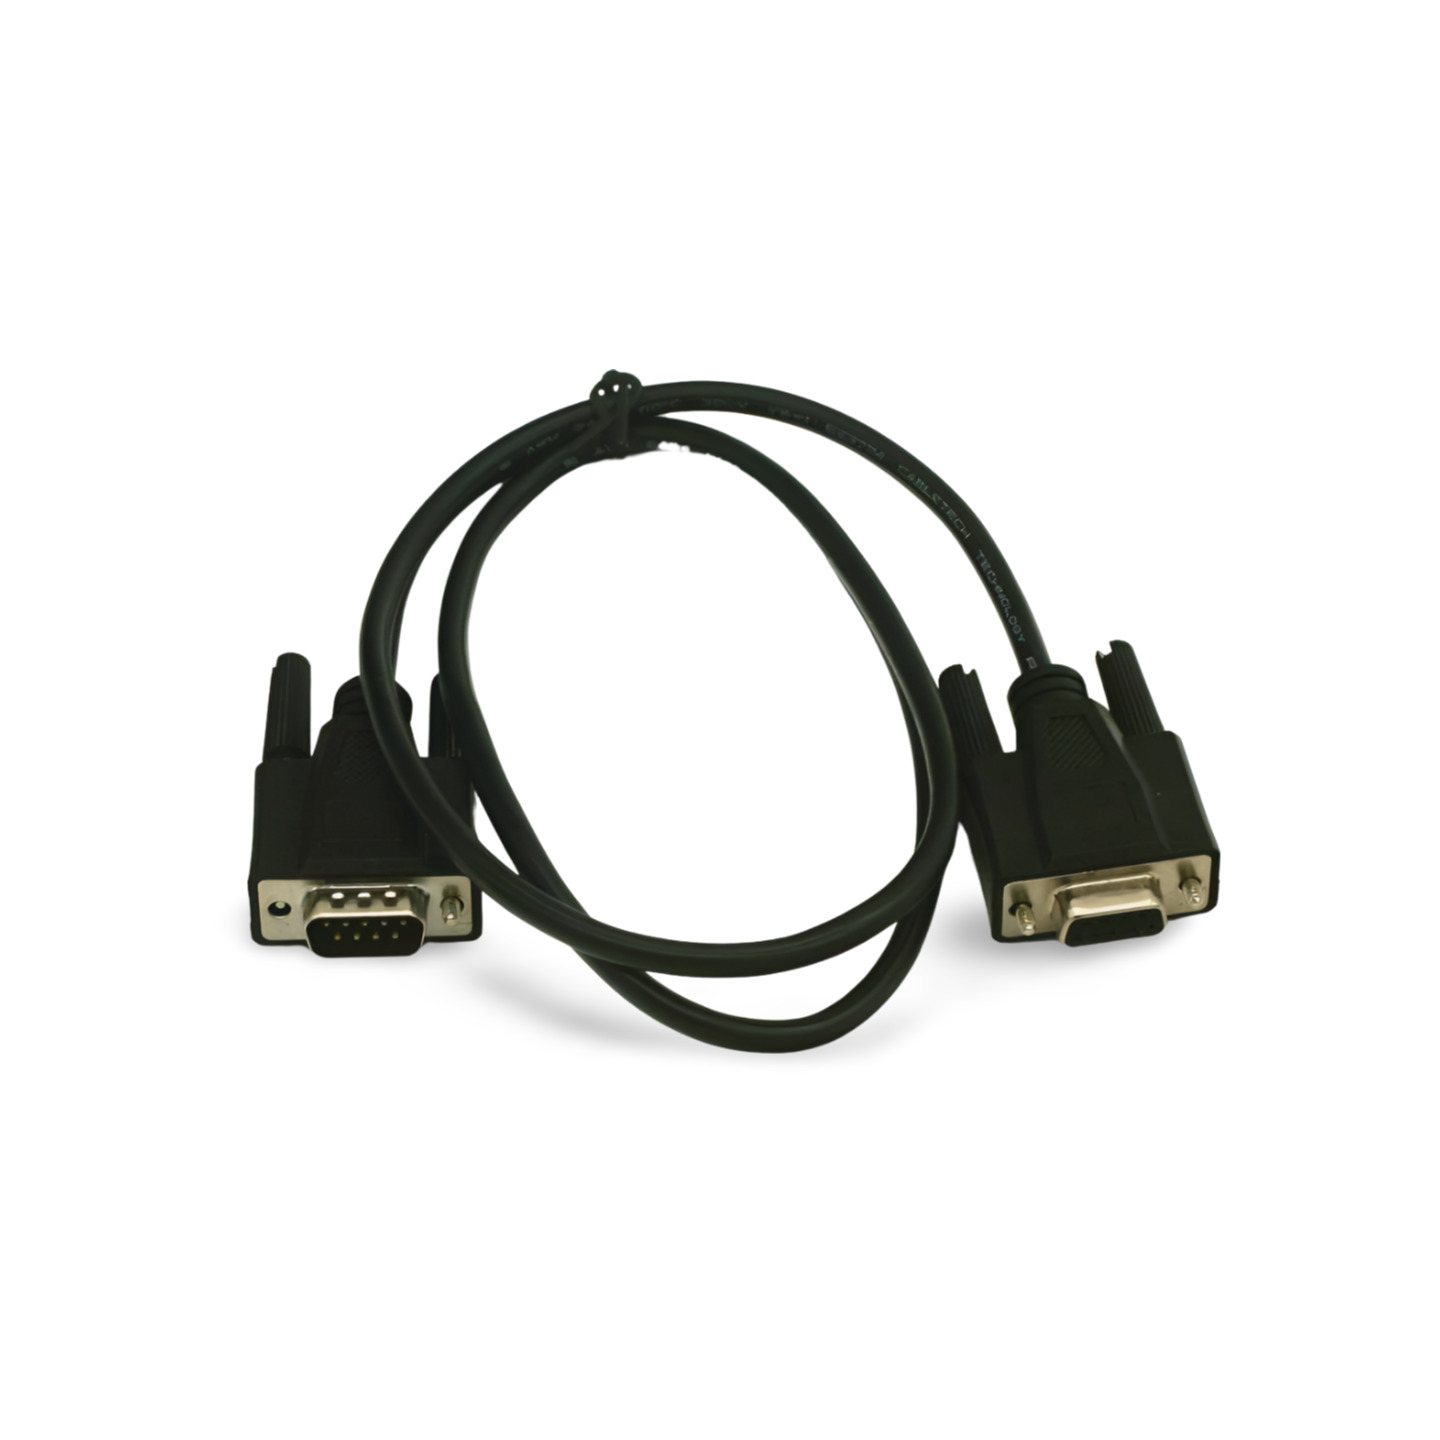 3ft DB9 Male to DB9 Female Serial Cable Extension - Black